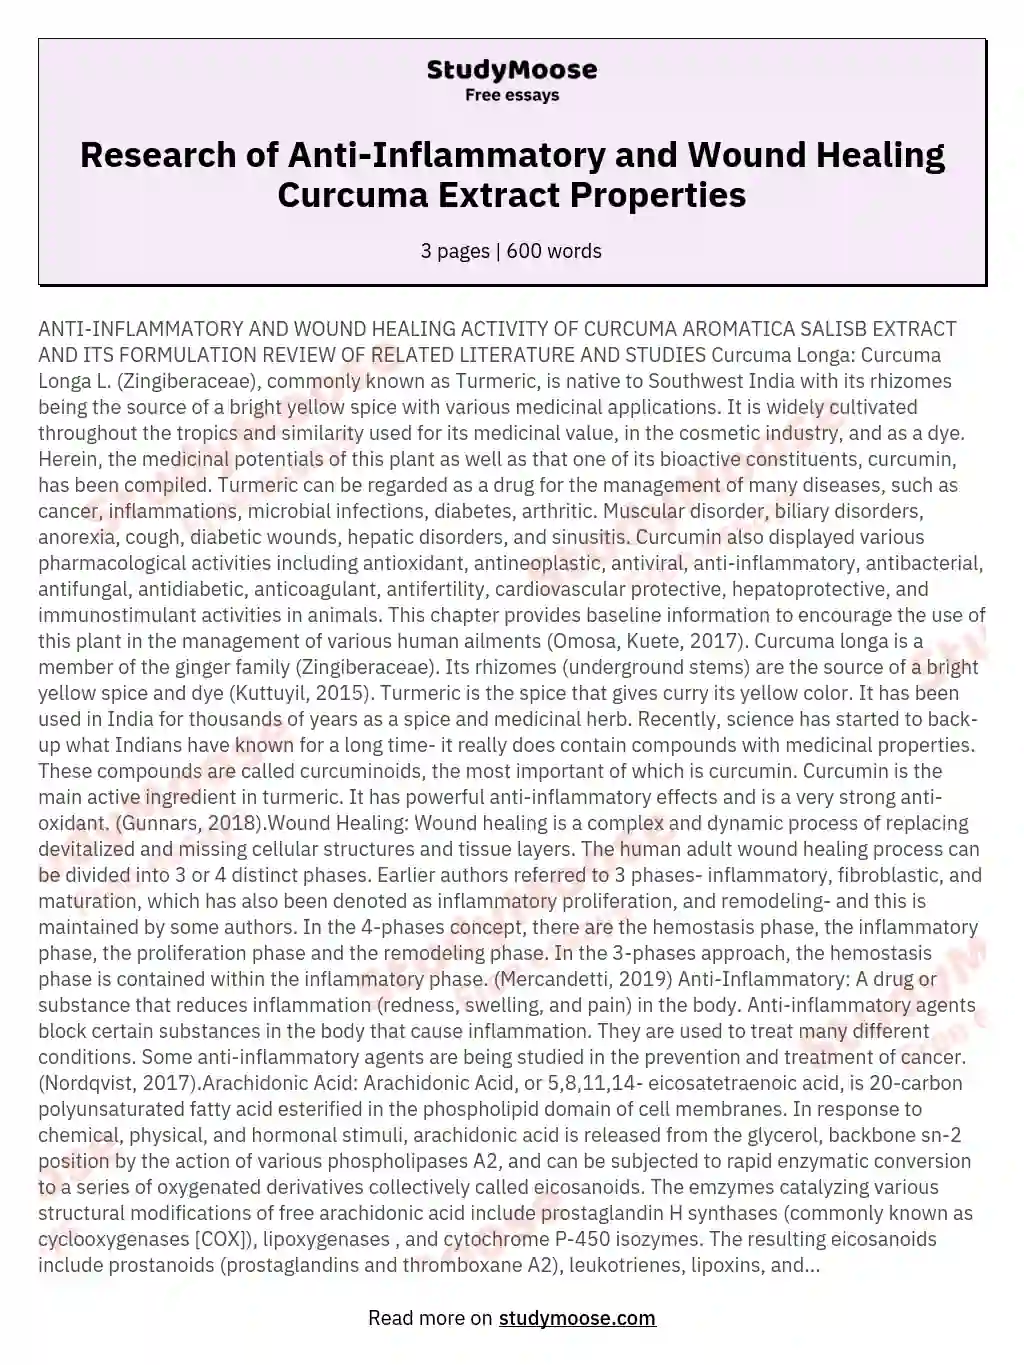 Research of Anti-Inflammatory and Wound Healing Curcuma Extract Properties essay